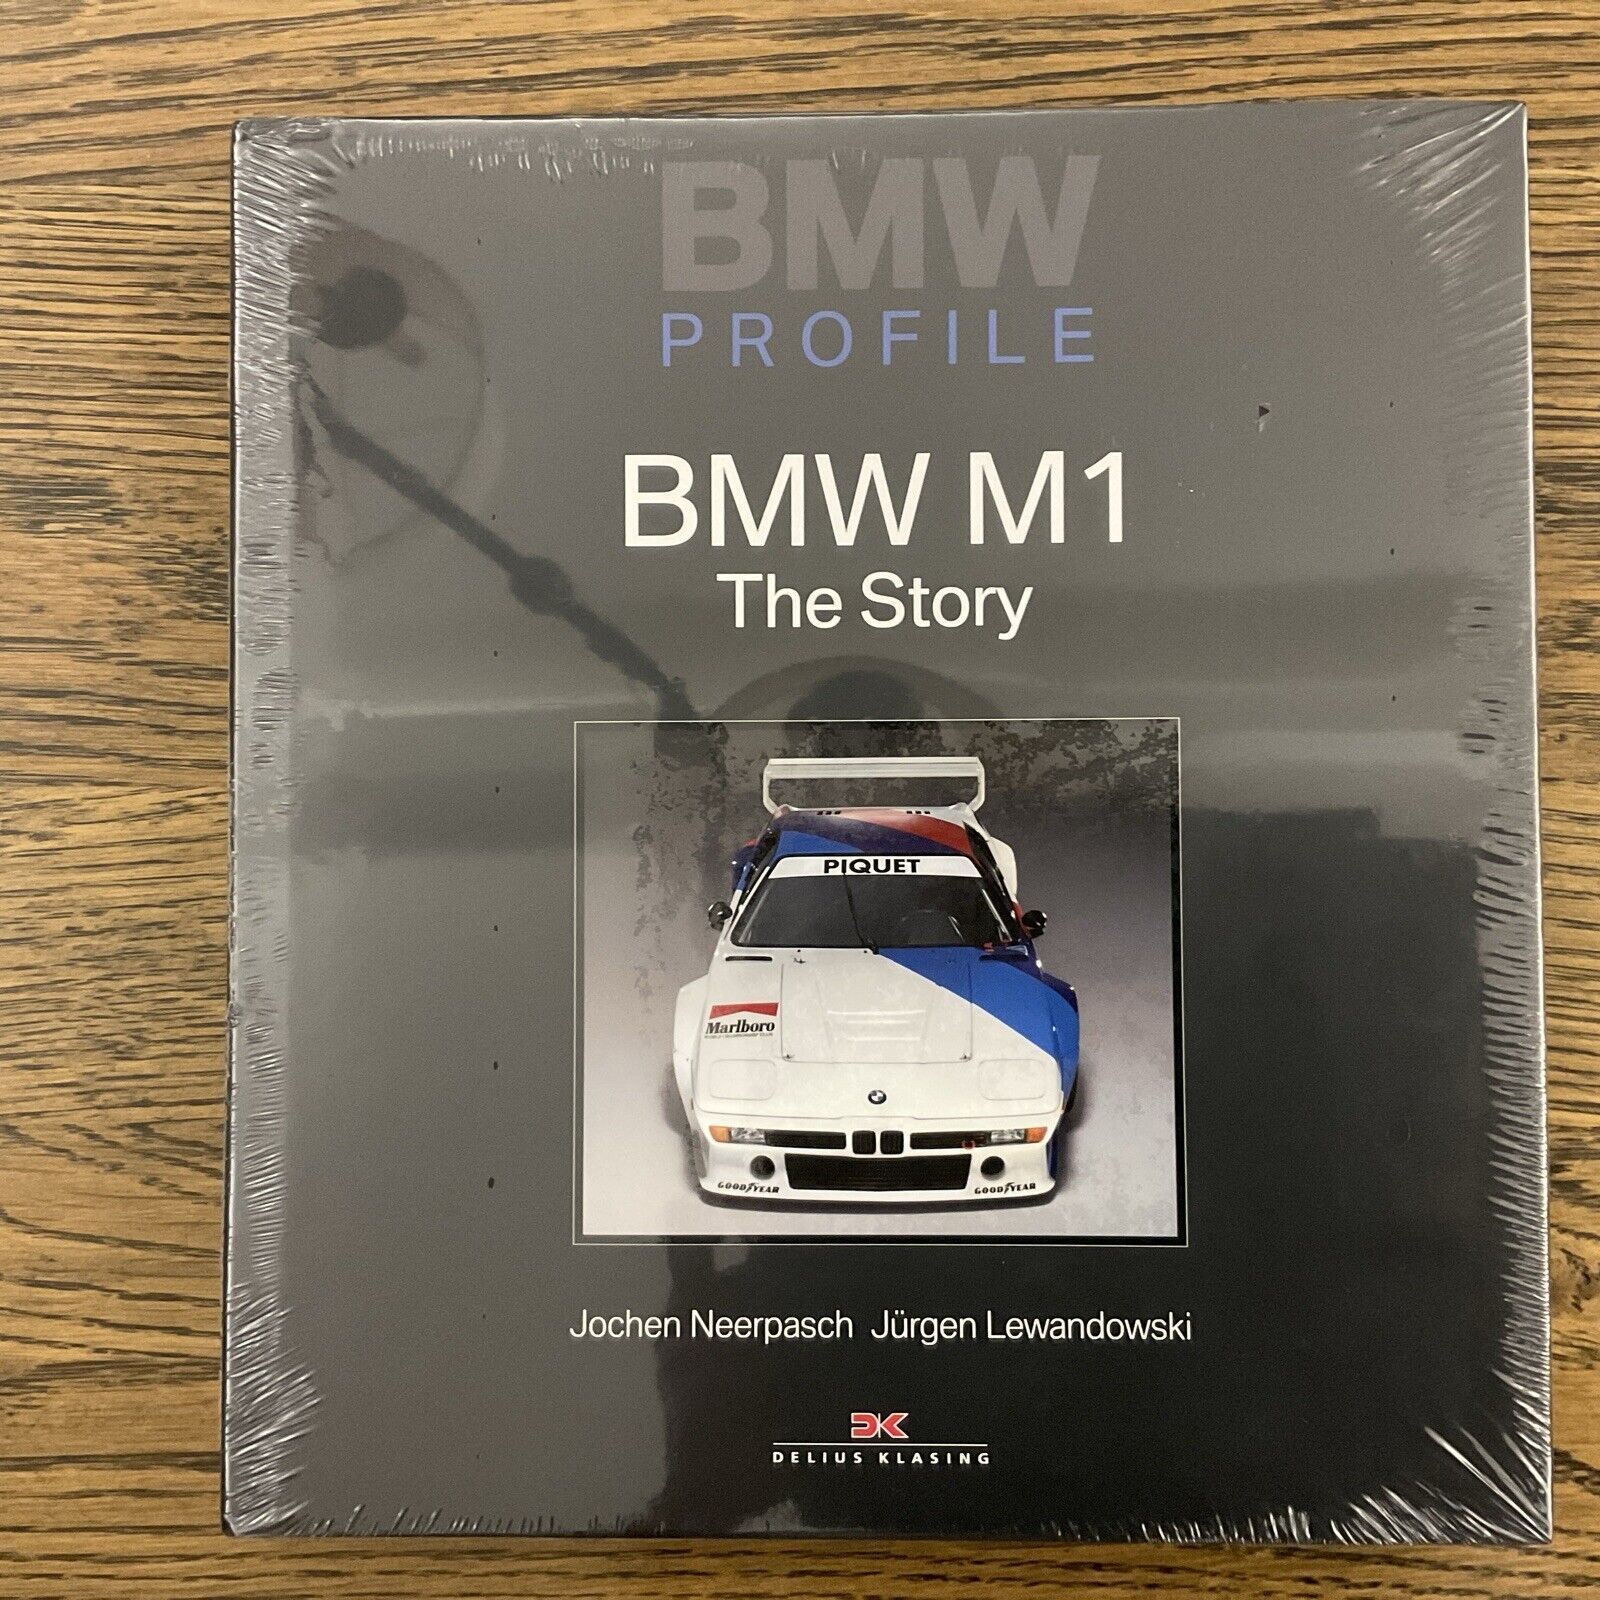 2008 BMW PROFILE M1 THE STORY OFFICIAL DELIUS KLASING NEW SEALED BOOK RARE